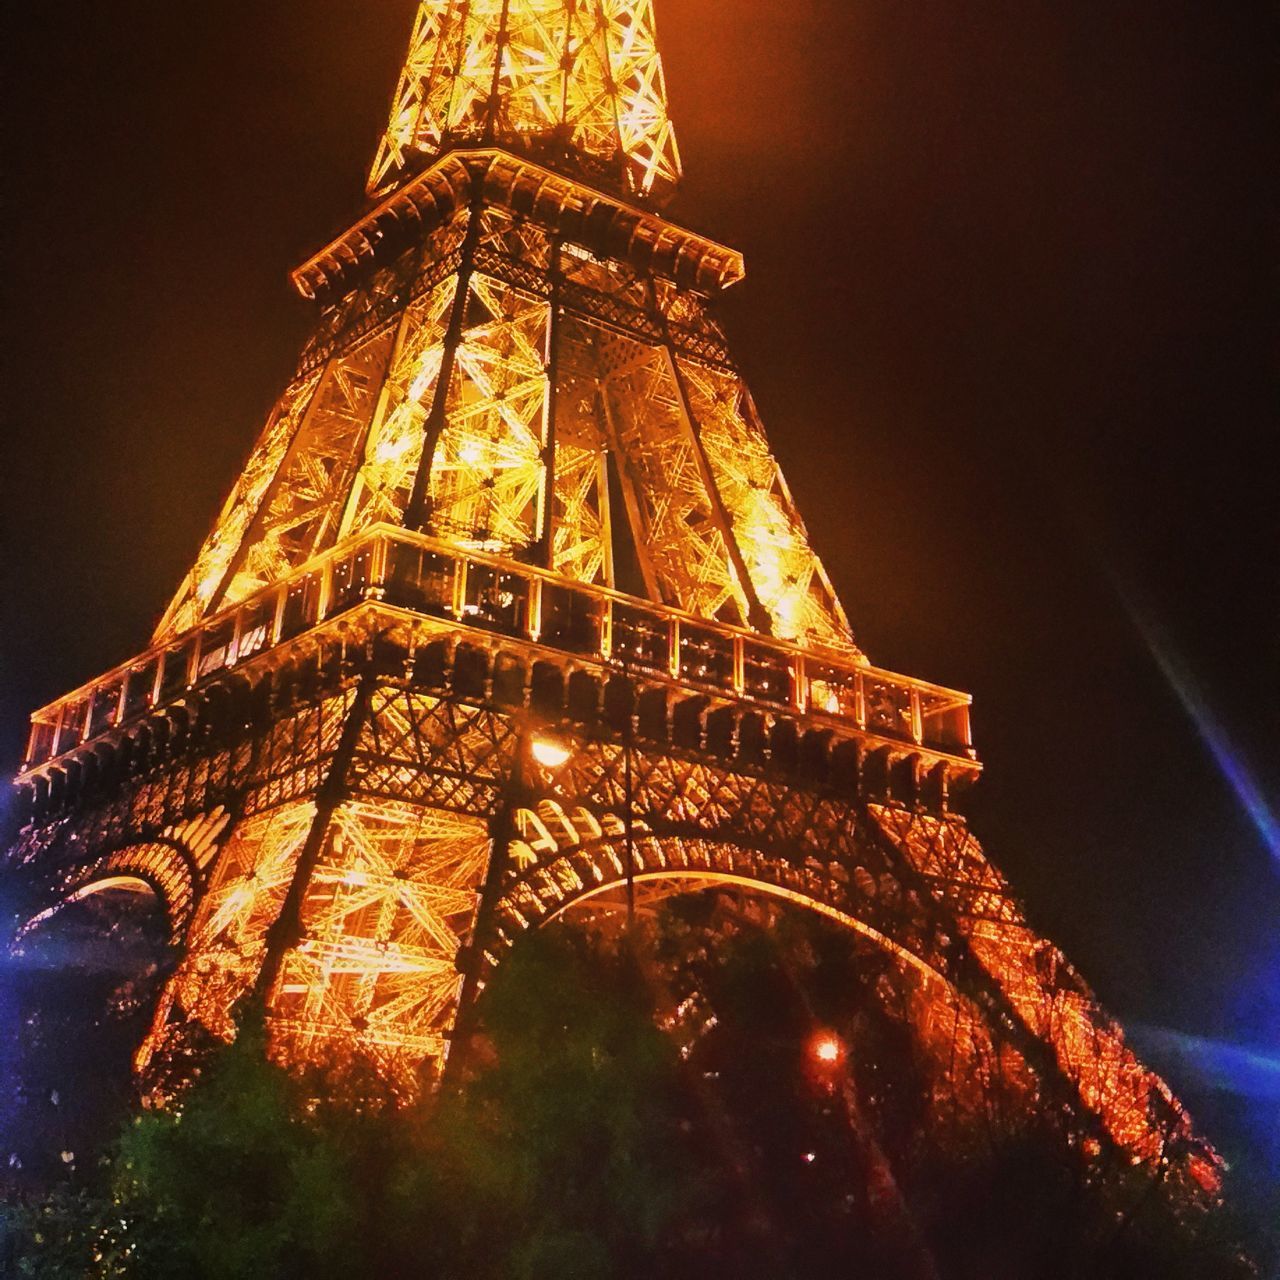 illuminated, famous place, night, architecture, international landmark, travel destinations, built structure, tourism, low angle view, capital cities, travel, city, sky, eiffel tower, building exterior, tower, architectural feature, tall - high, history, long exposure